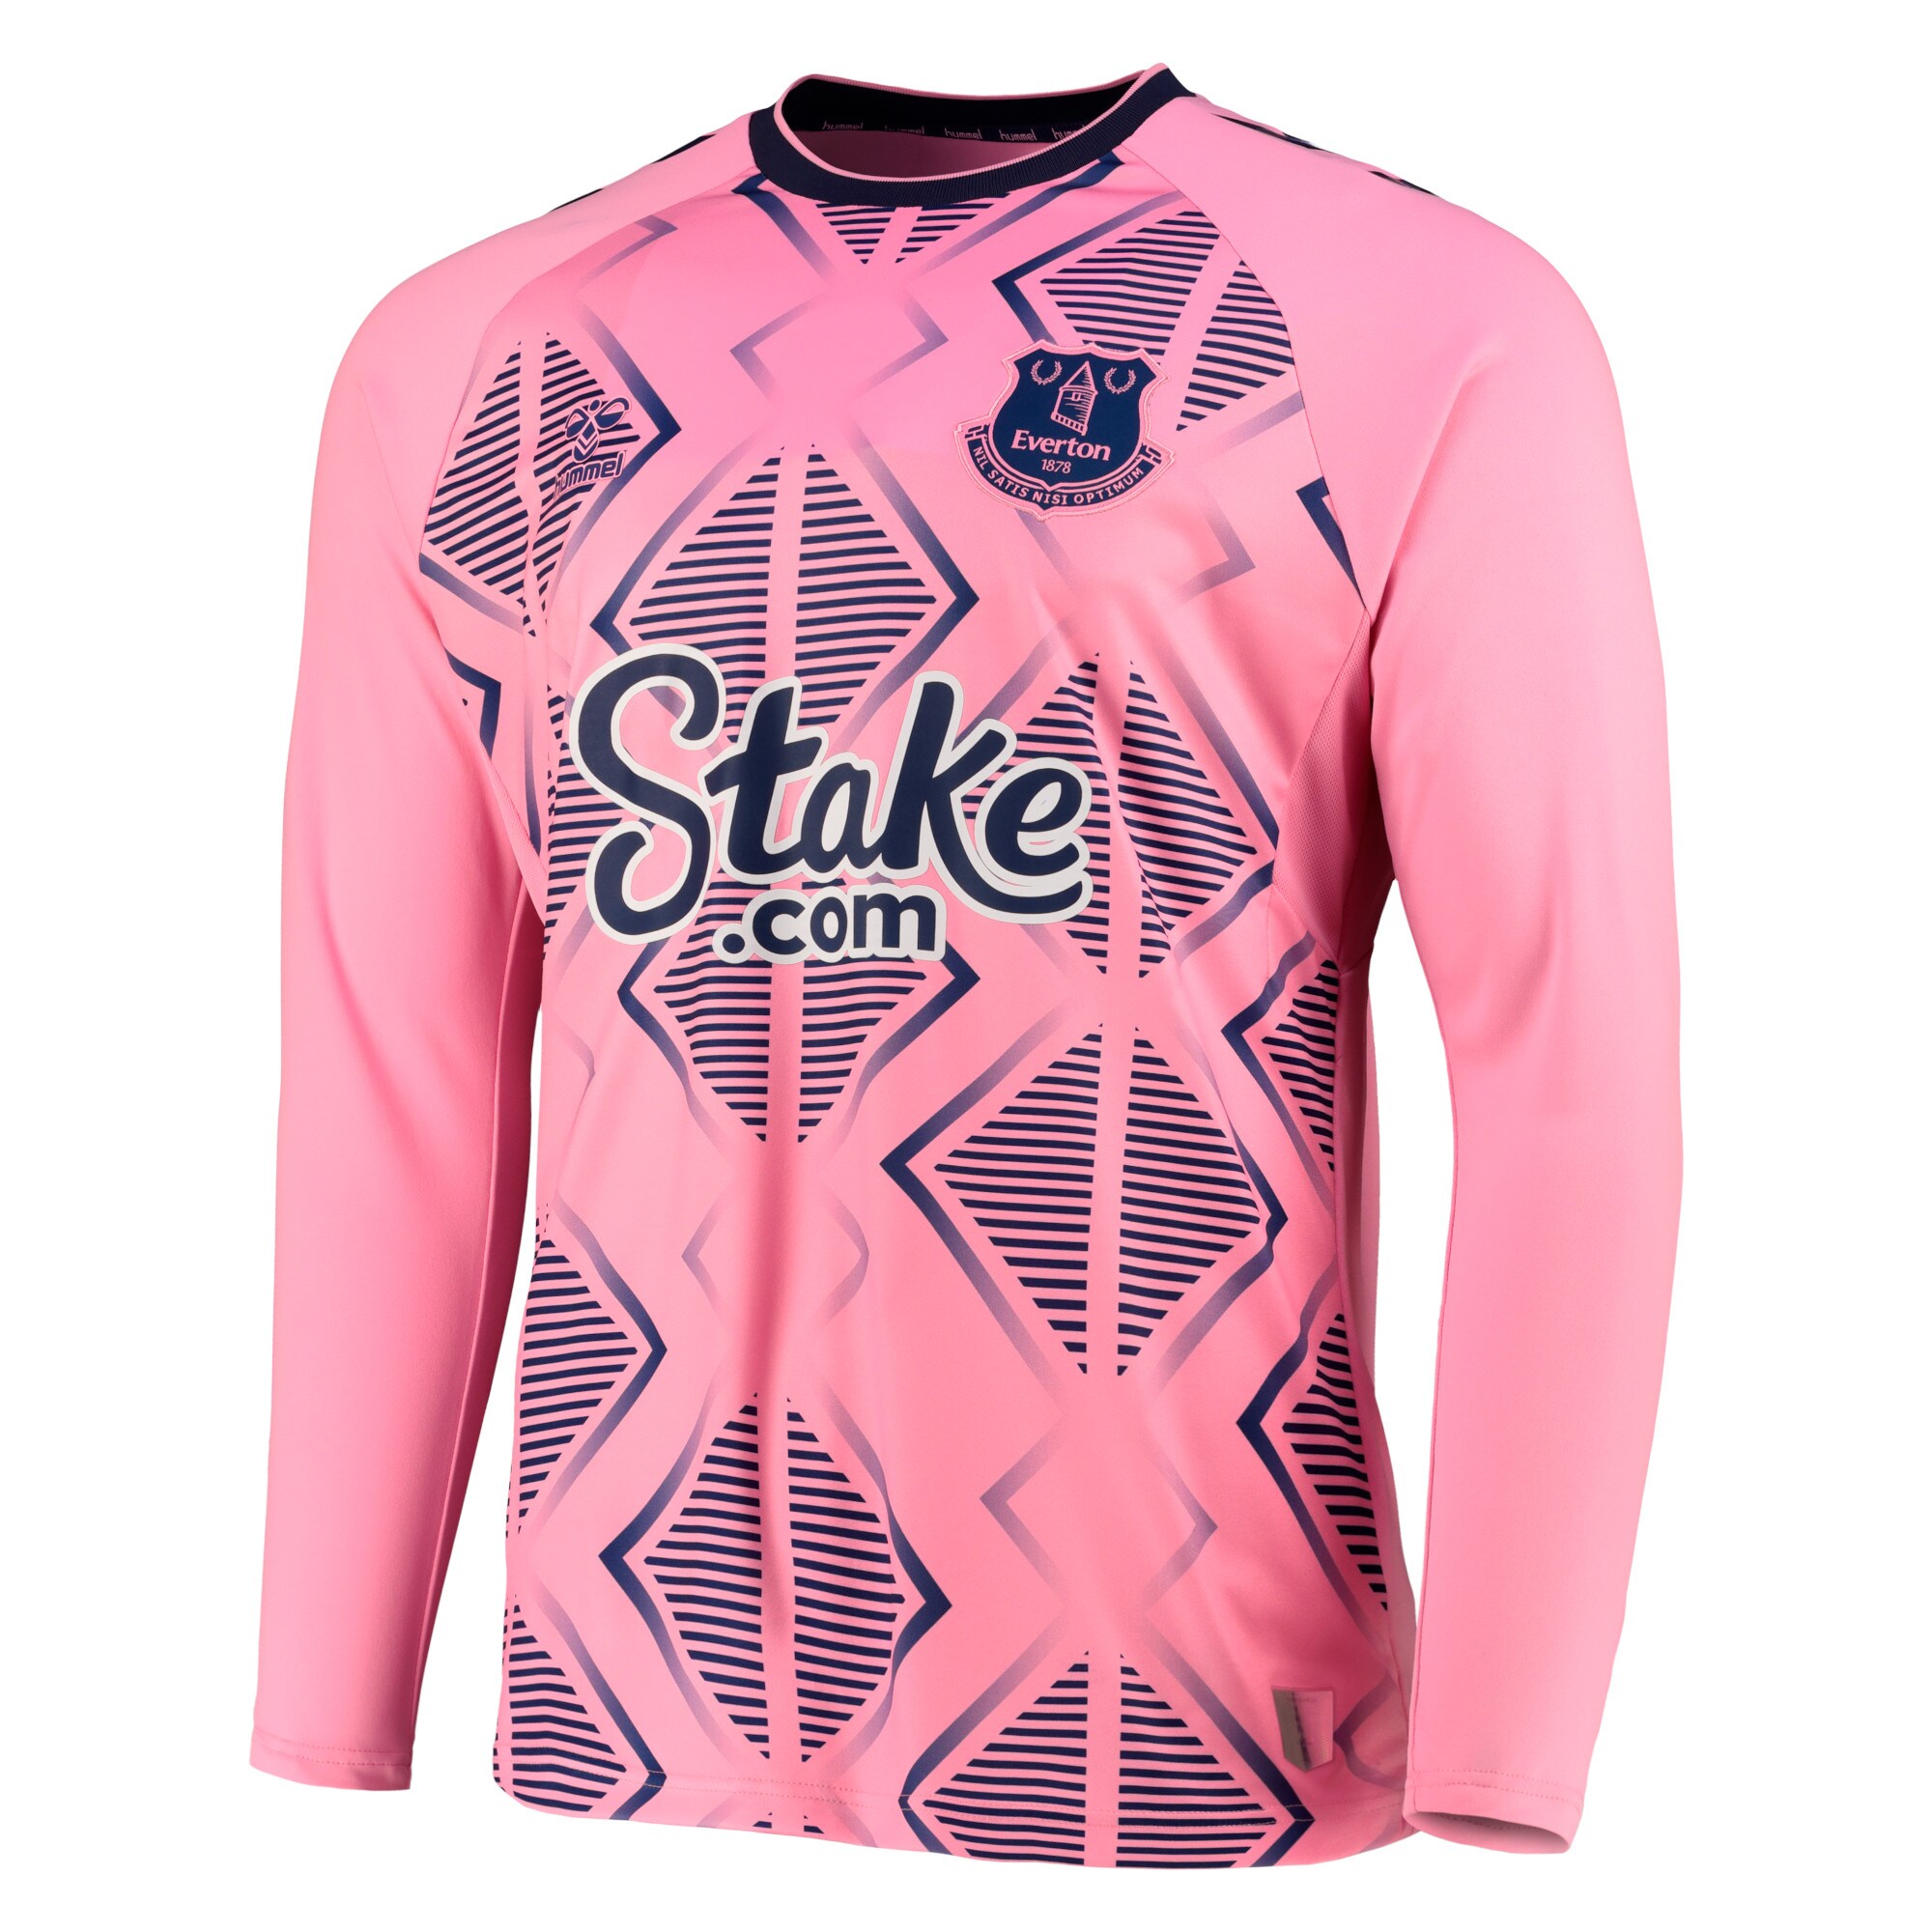 Everton Away Shirt 2022-23 - Long Sleeve with Townsend 14 printing